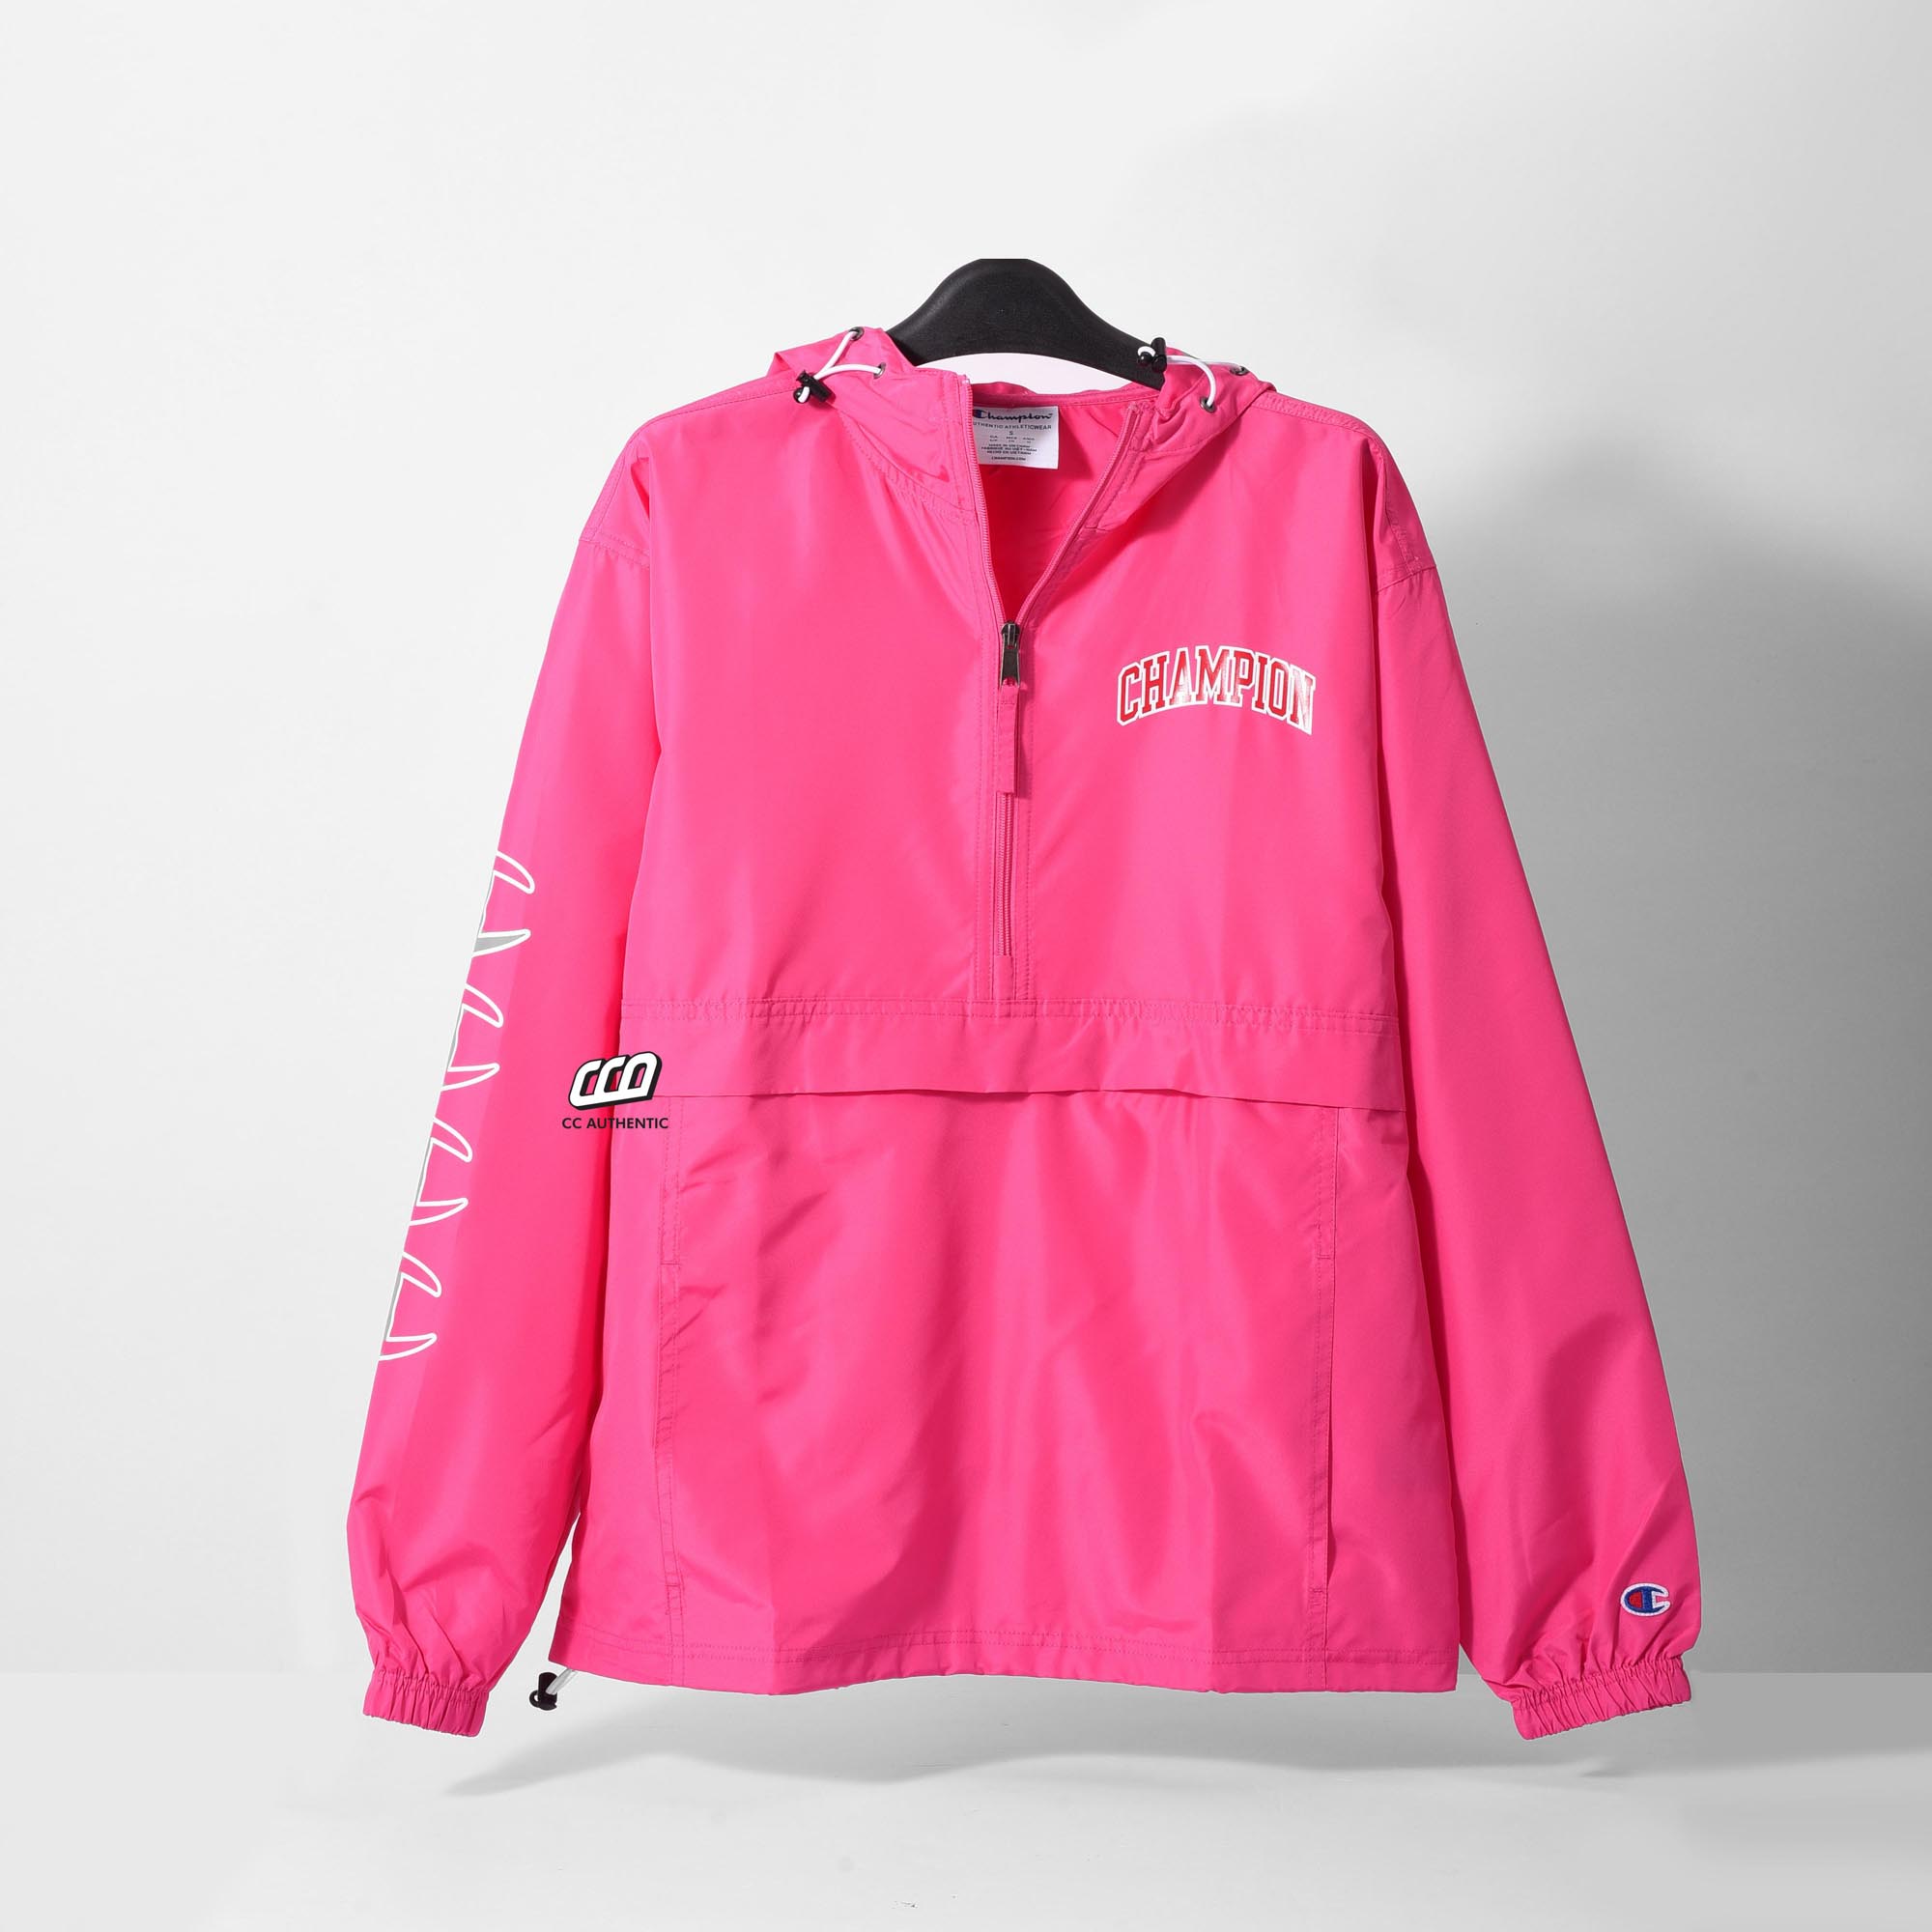 CHAMPION PACKABLE JACKET - PINK